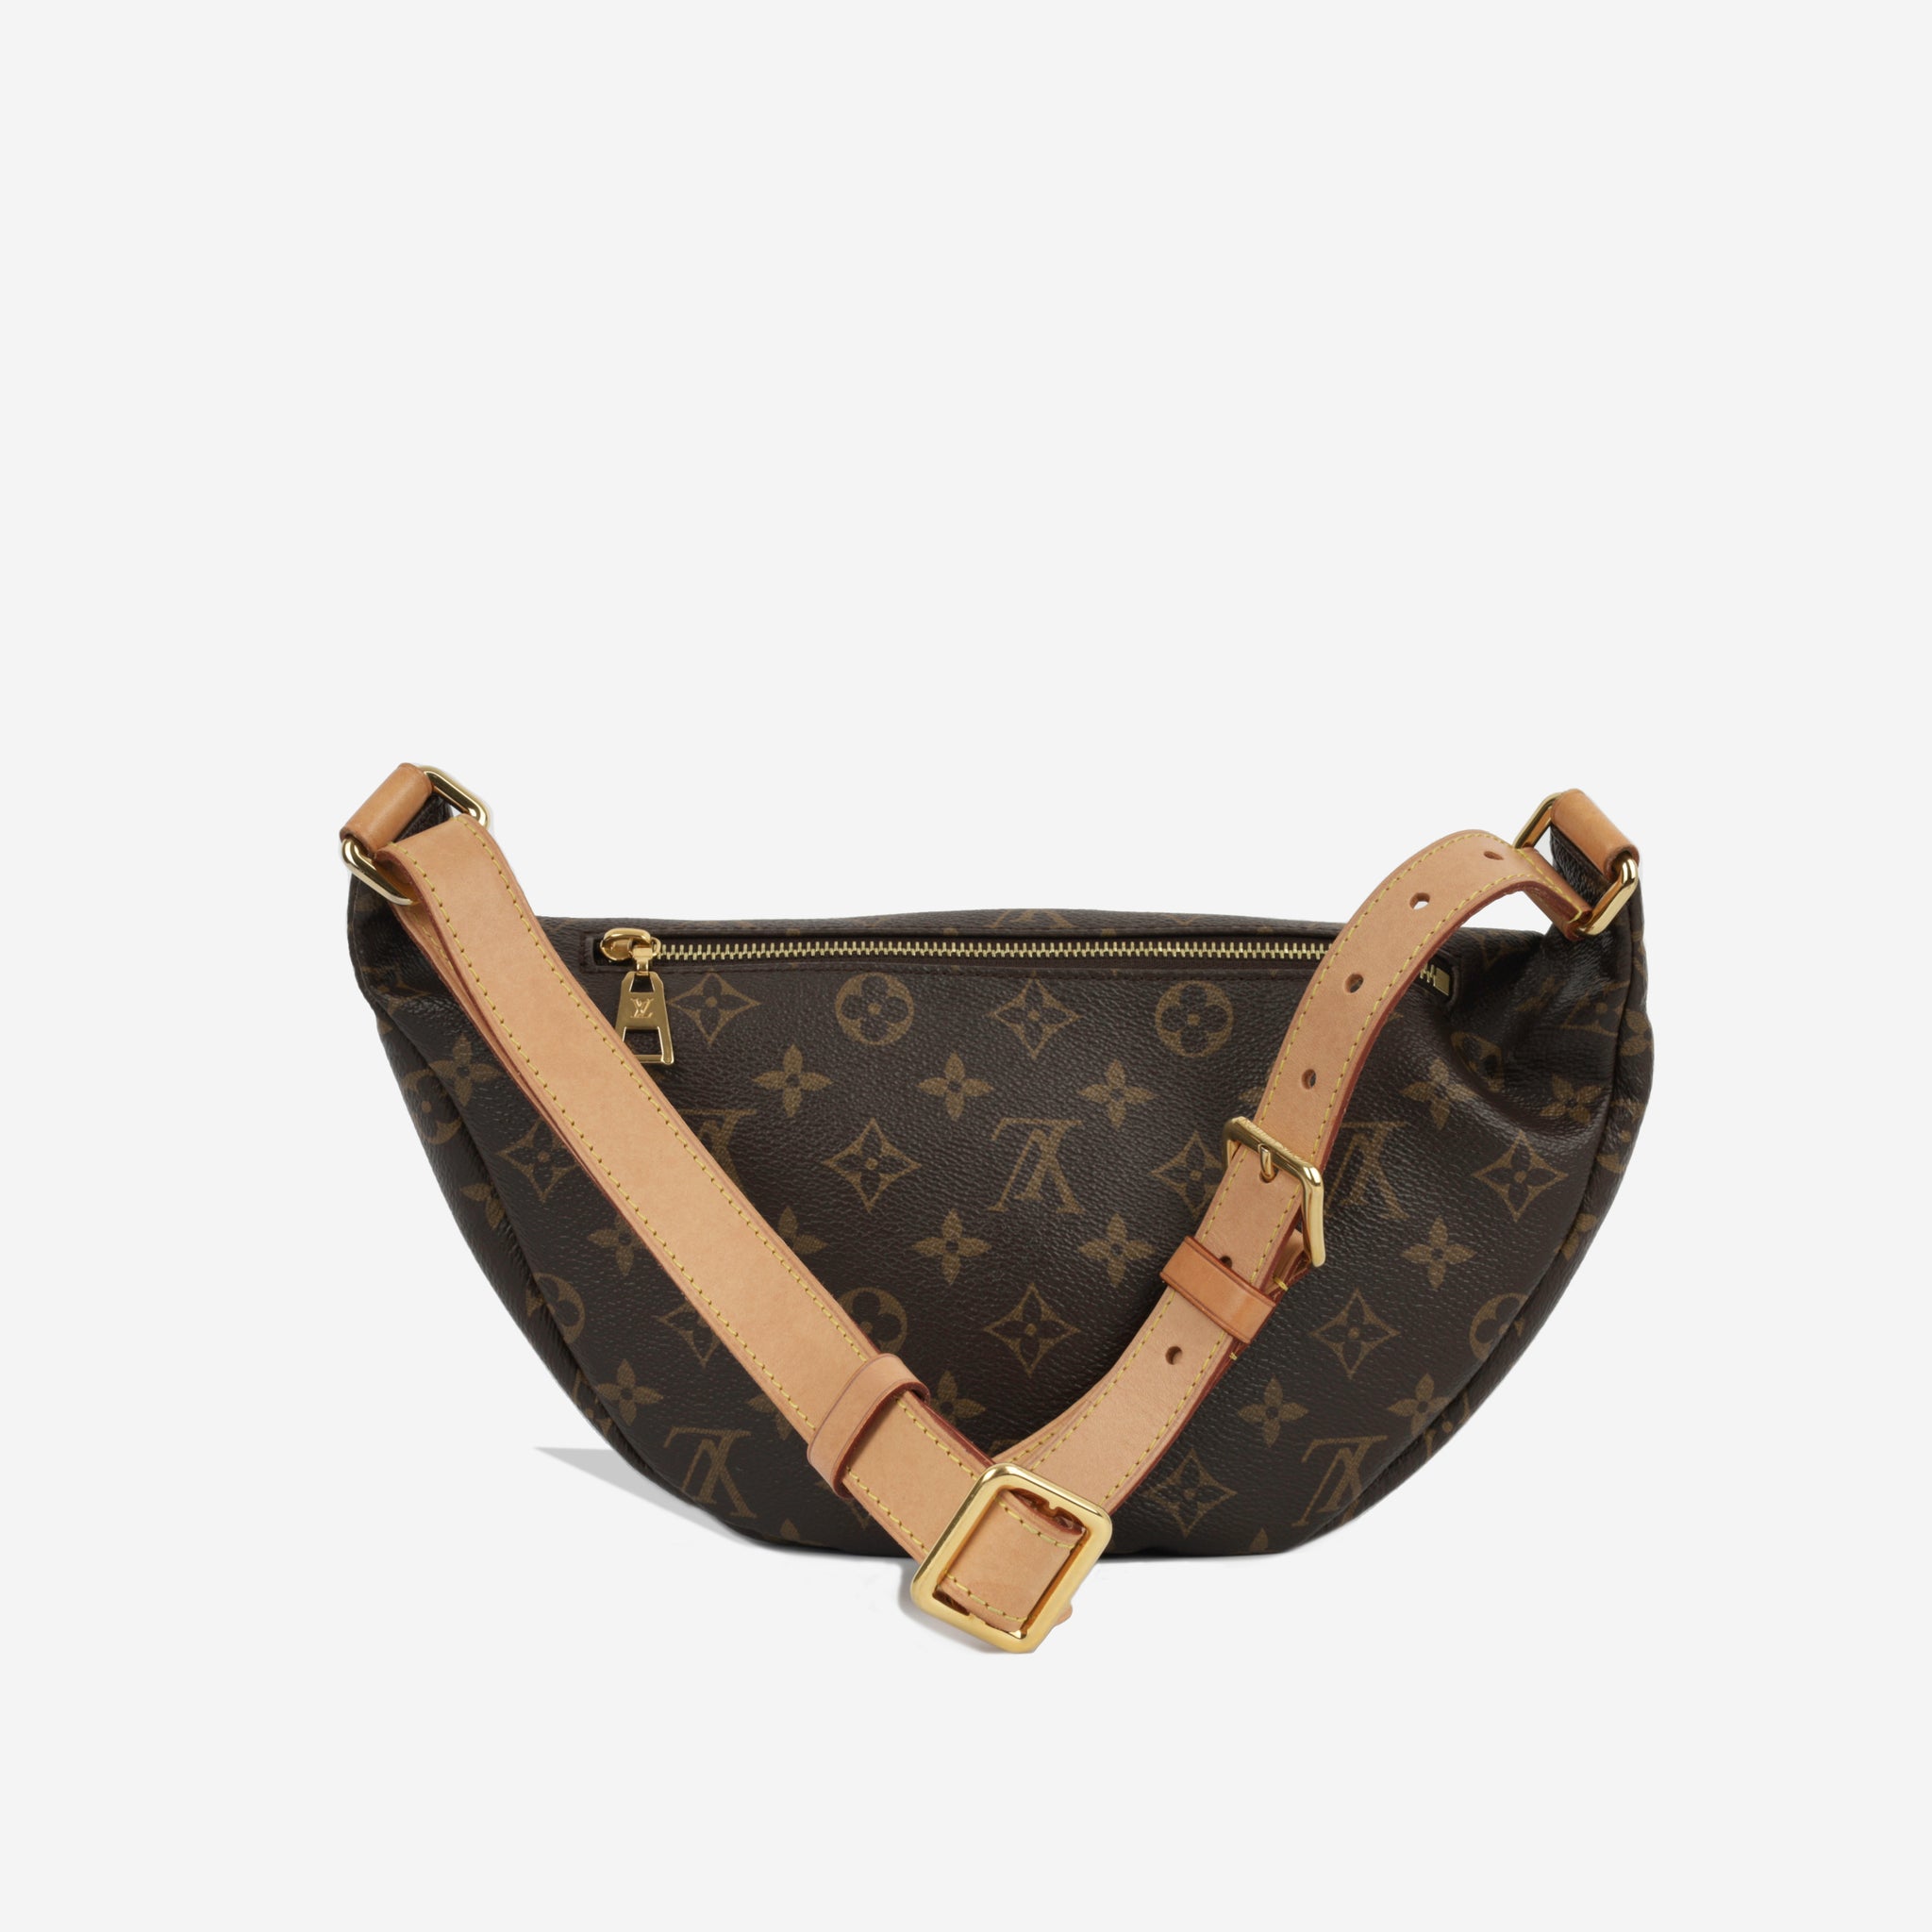 How to Wear the Louis Vuitton Bumbag in Monogram  PROs and CONs   Handbagholic  YouTube